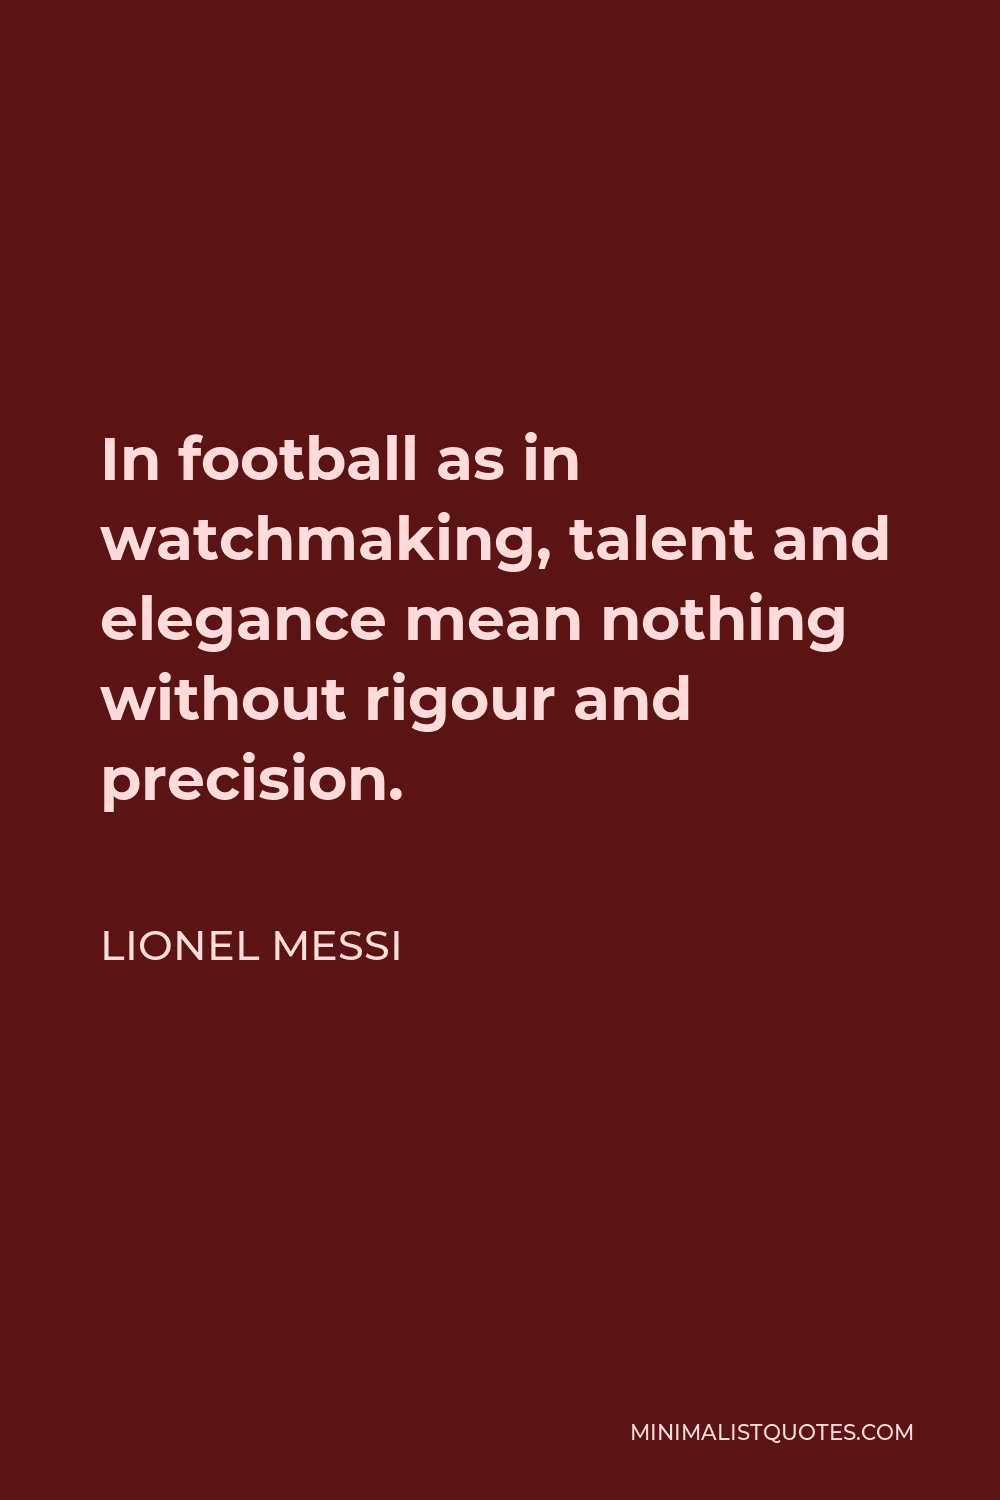 Lionel Messi Quote - In football as in watchmaking, talent and elegance mean nothing without rigour and precision.